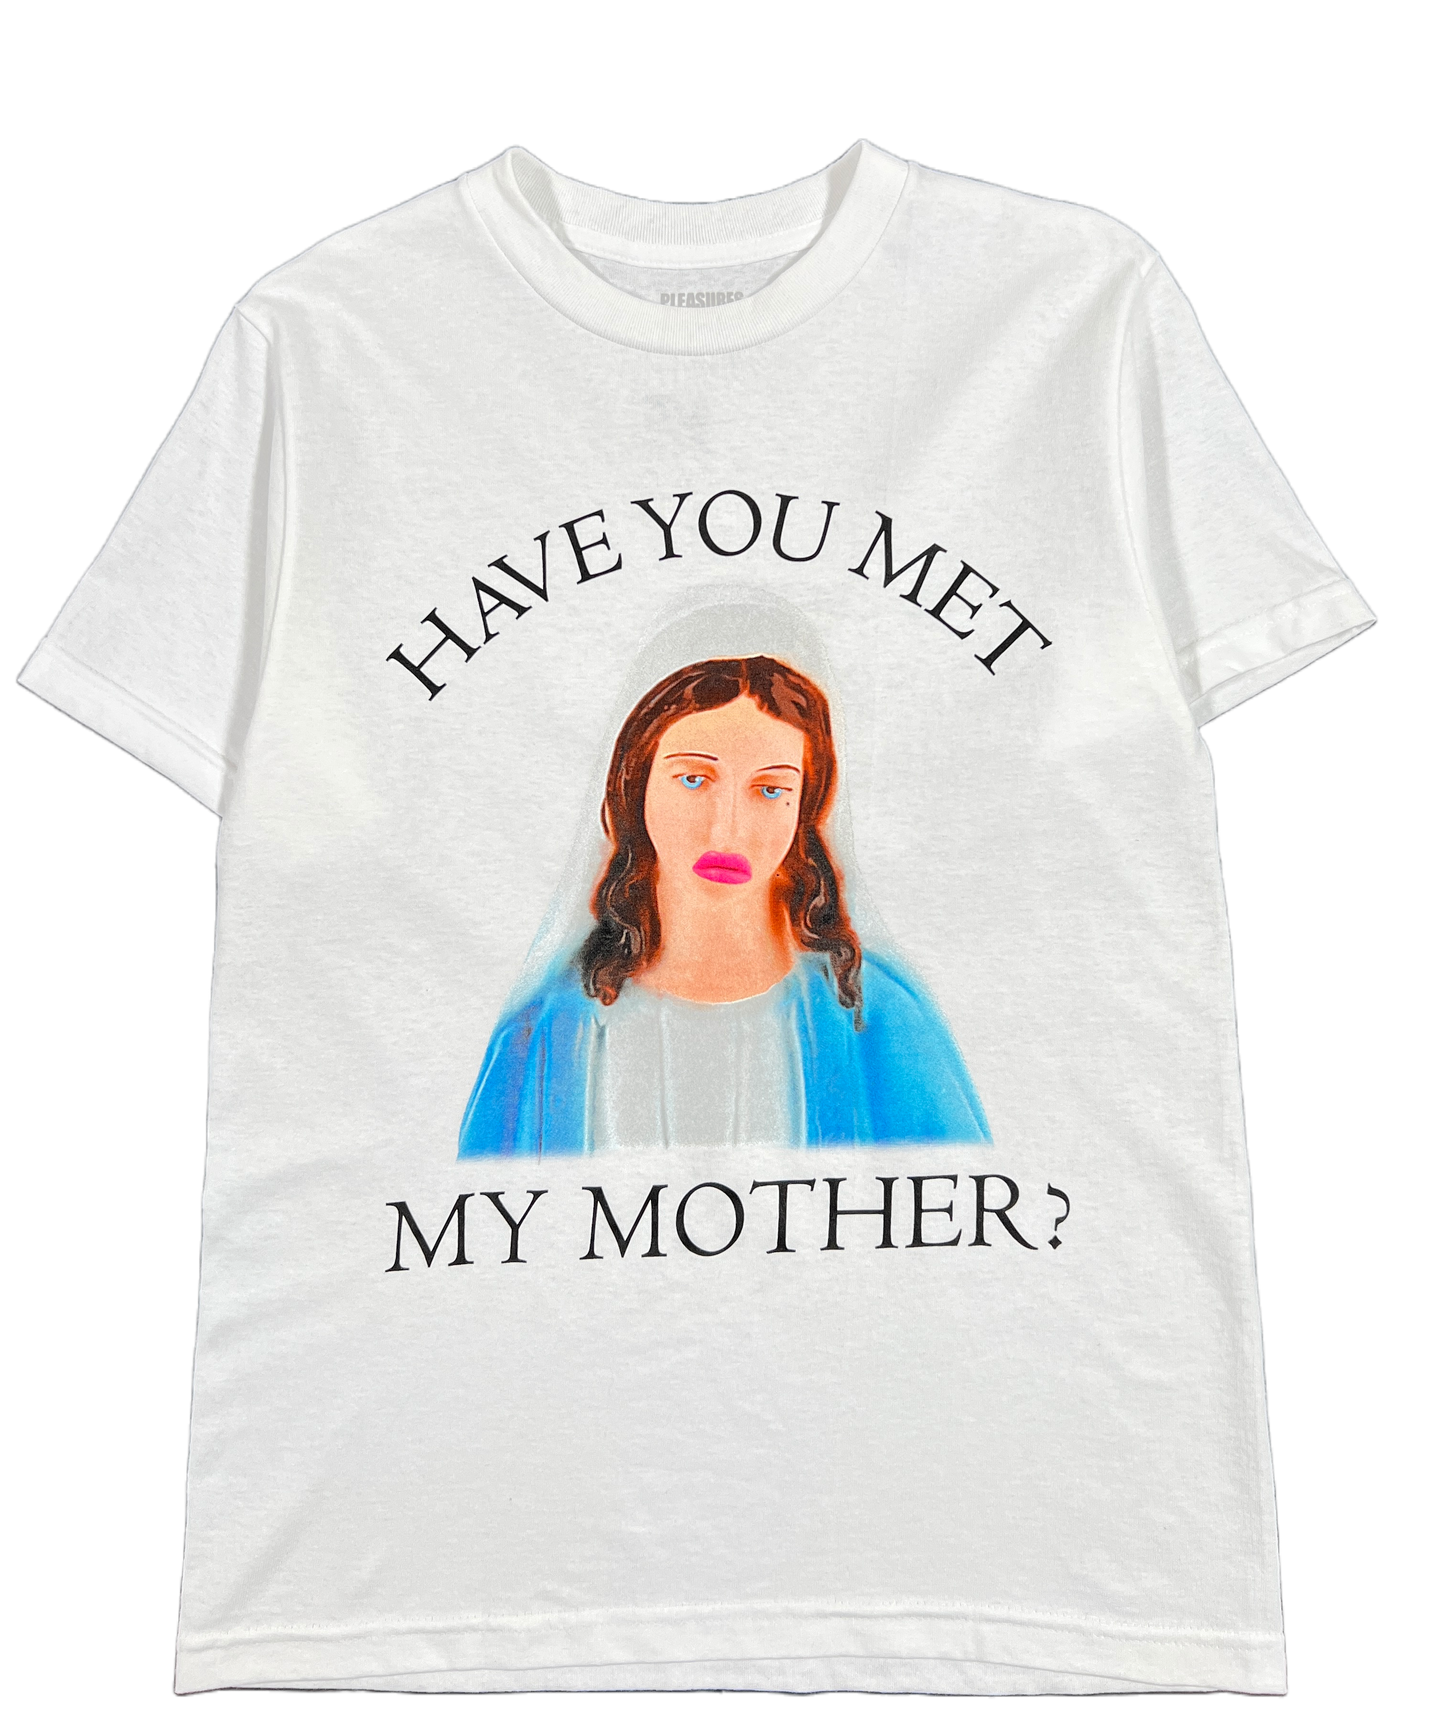 Have you met my graphic PLEASURES MOTHER T-SHIRT WHITE?